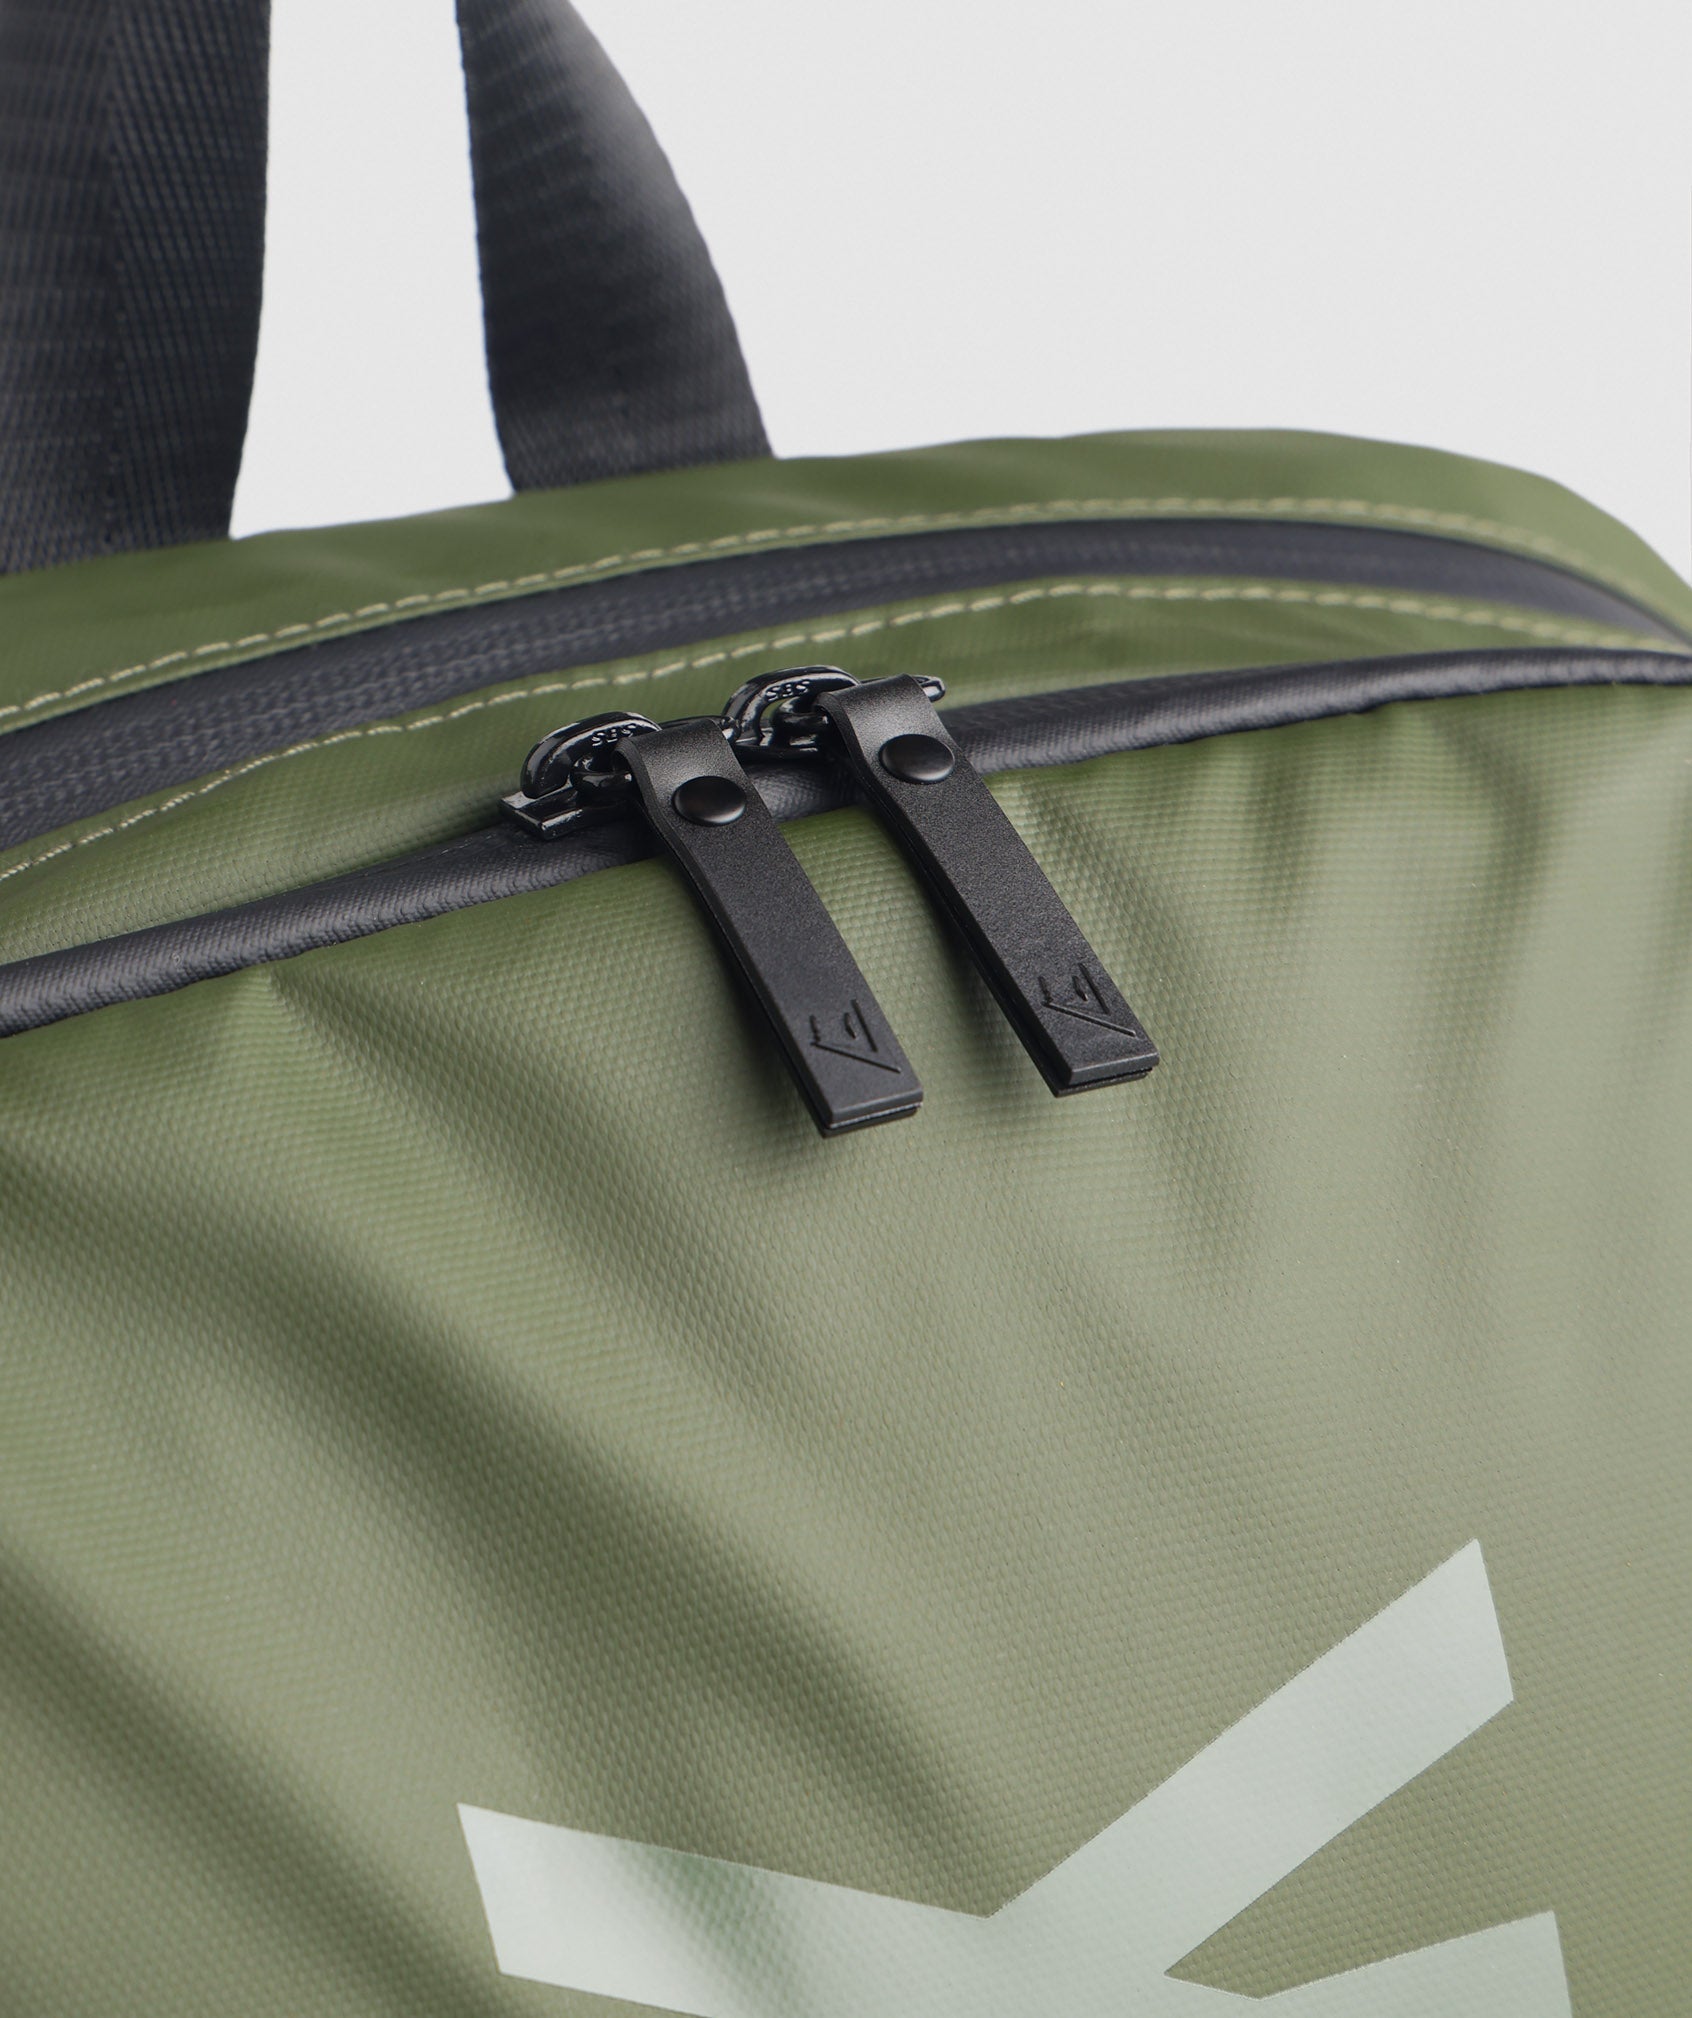 X-Series 0.3 Backpack in Core Olive - view 2